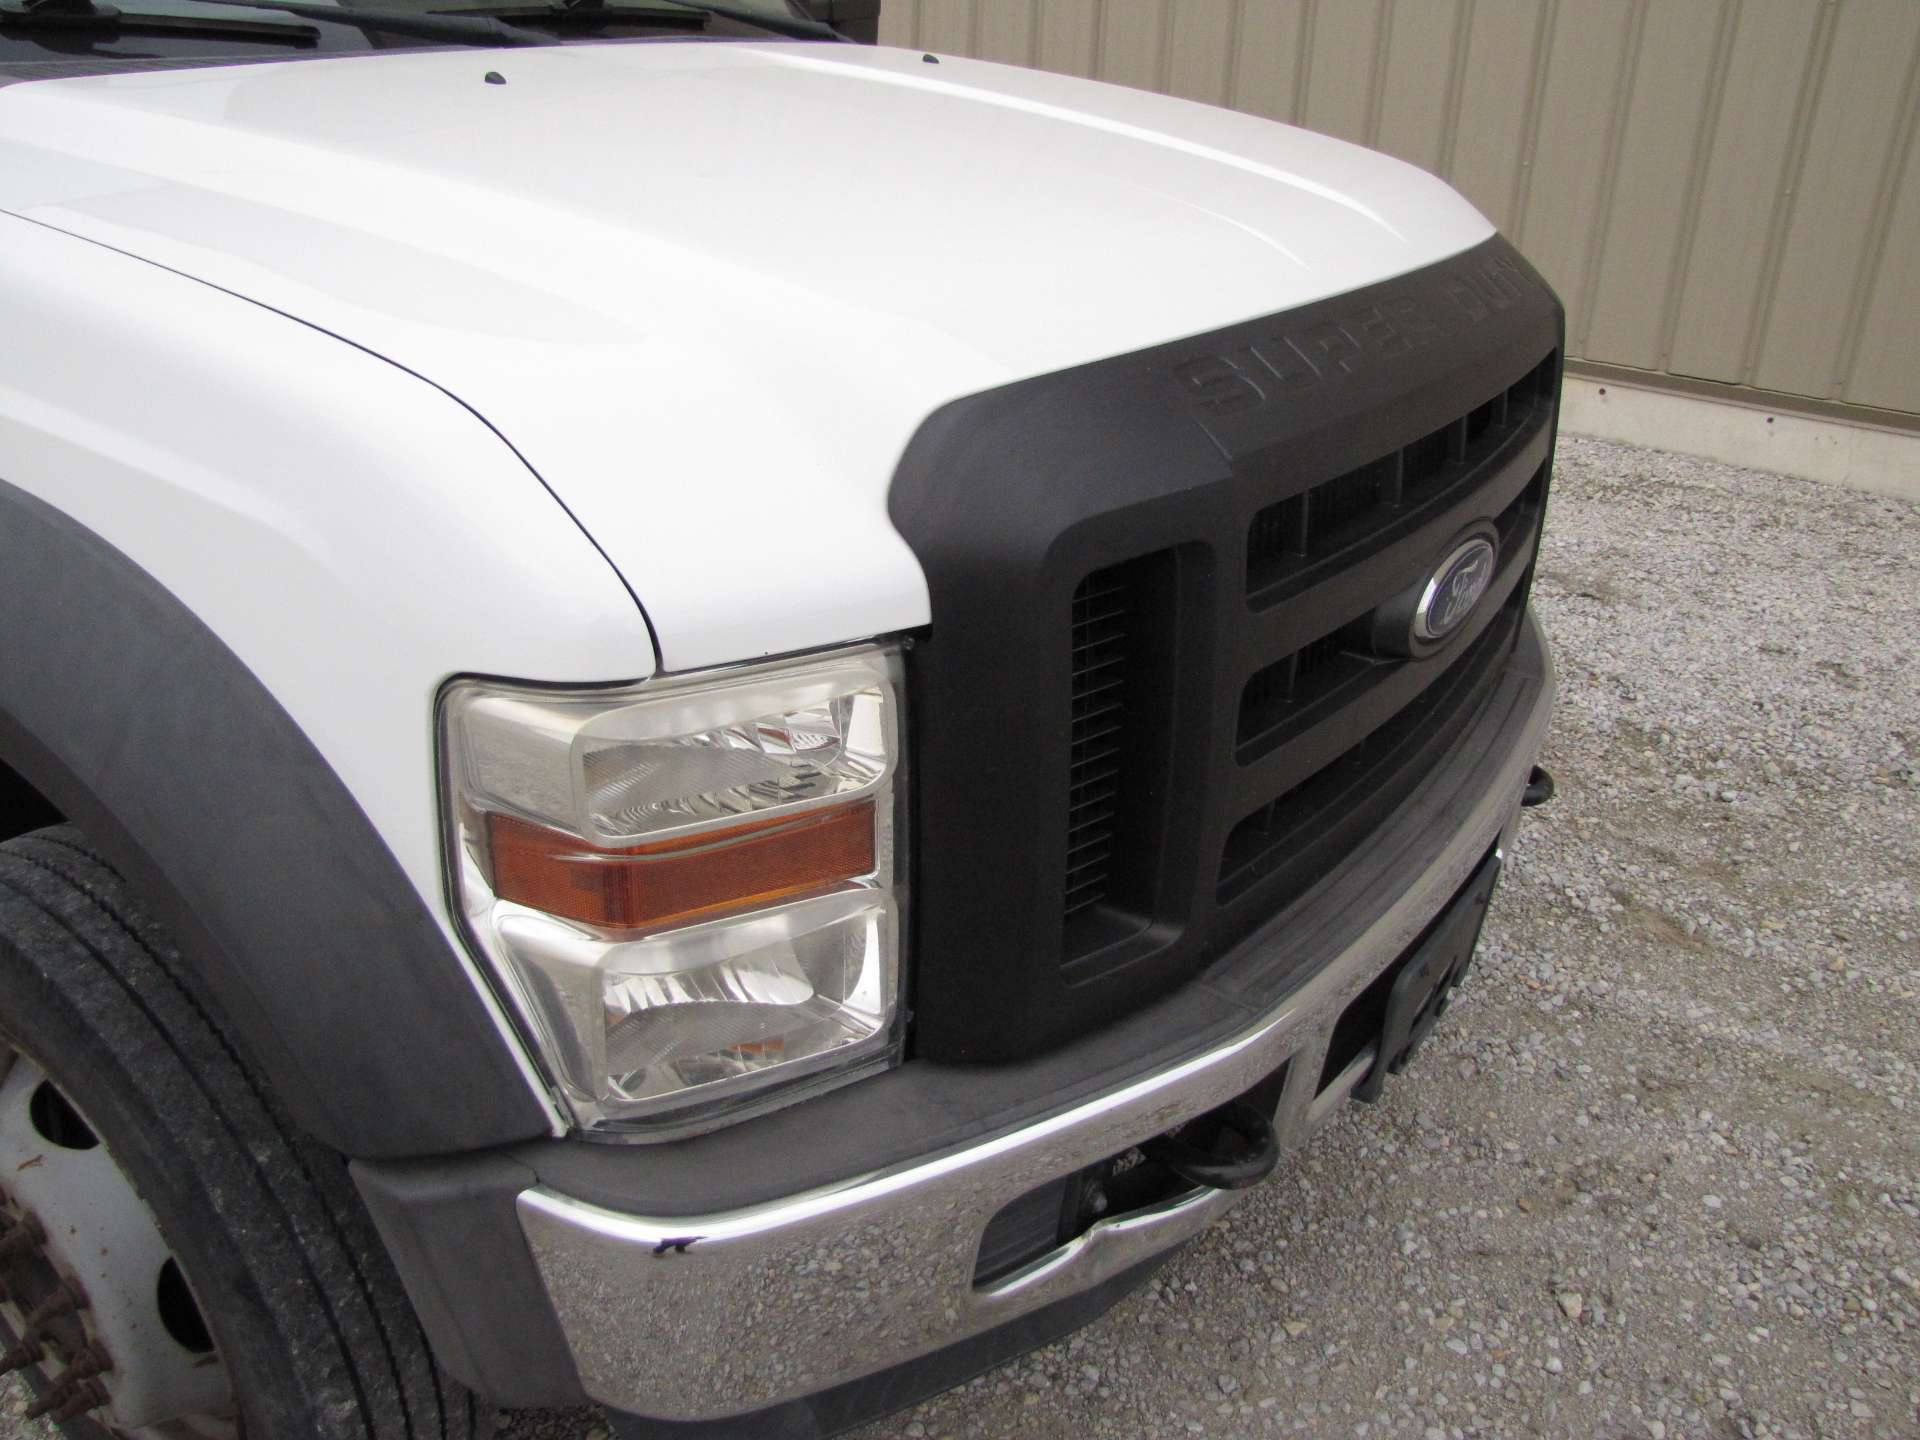 2009 Ford F450 XL Super Duty pickup truck - Image 39 of 58